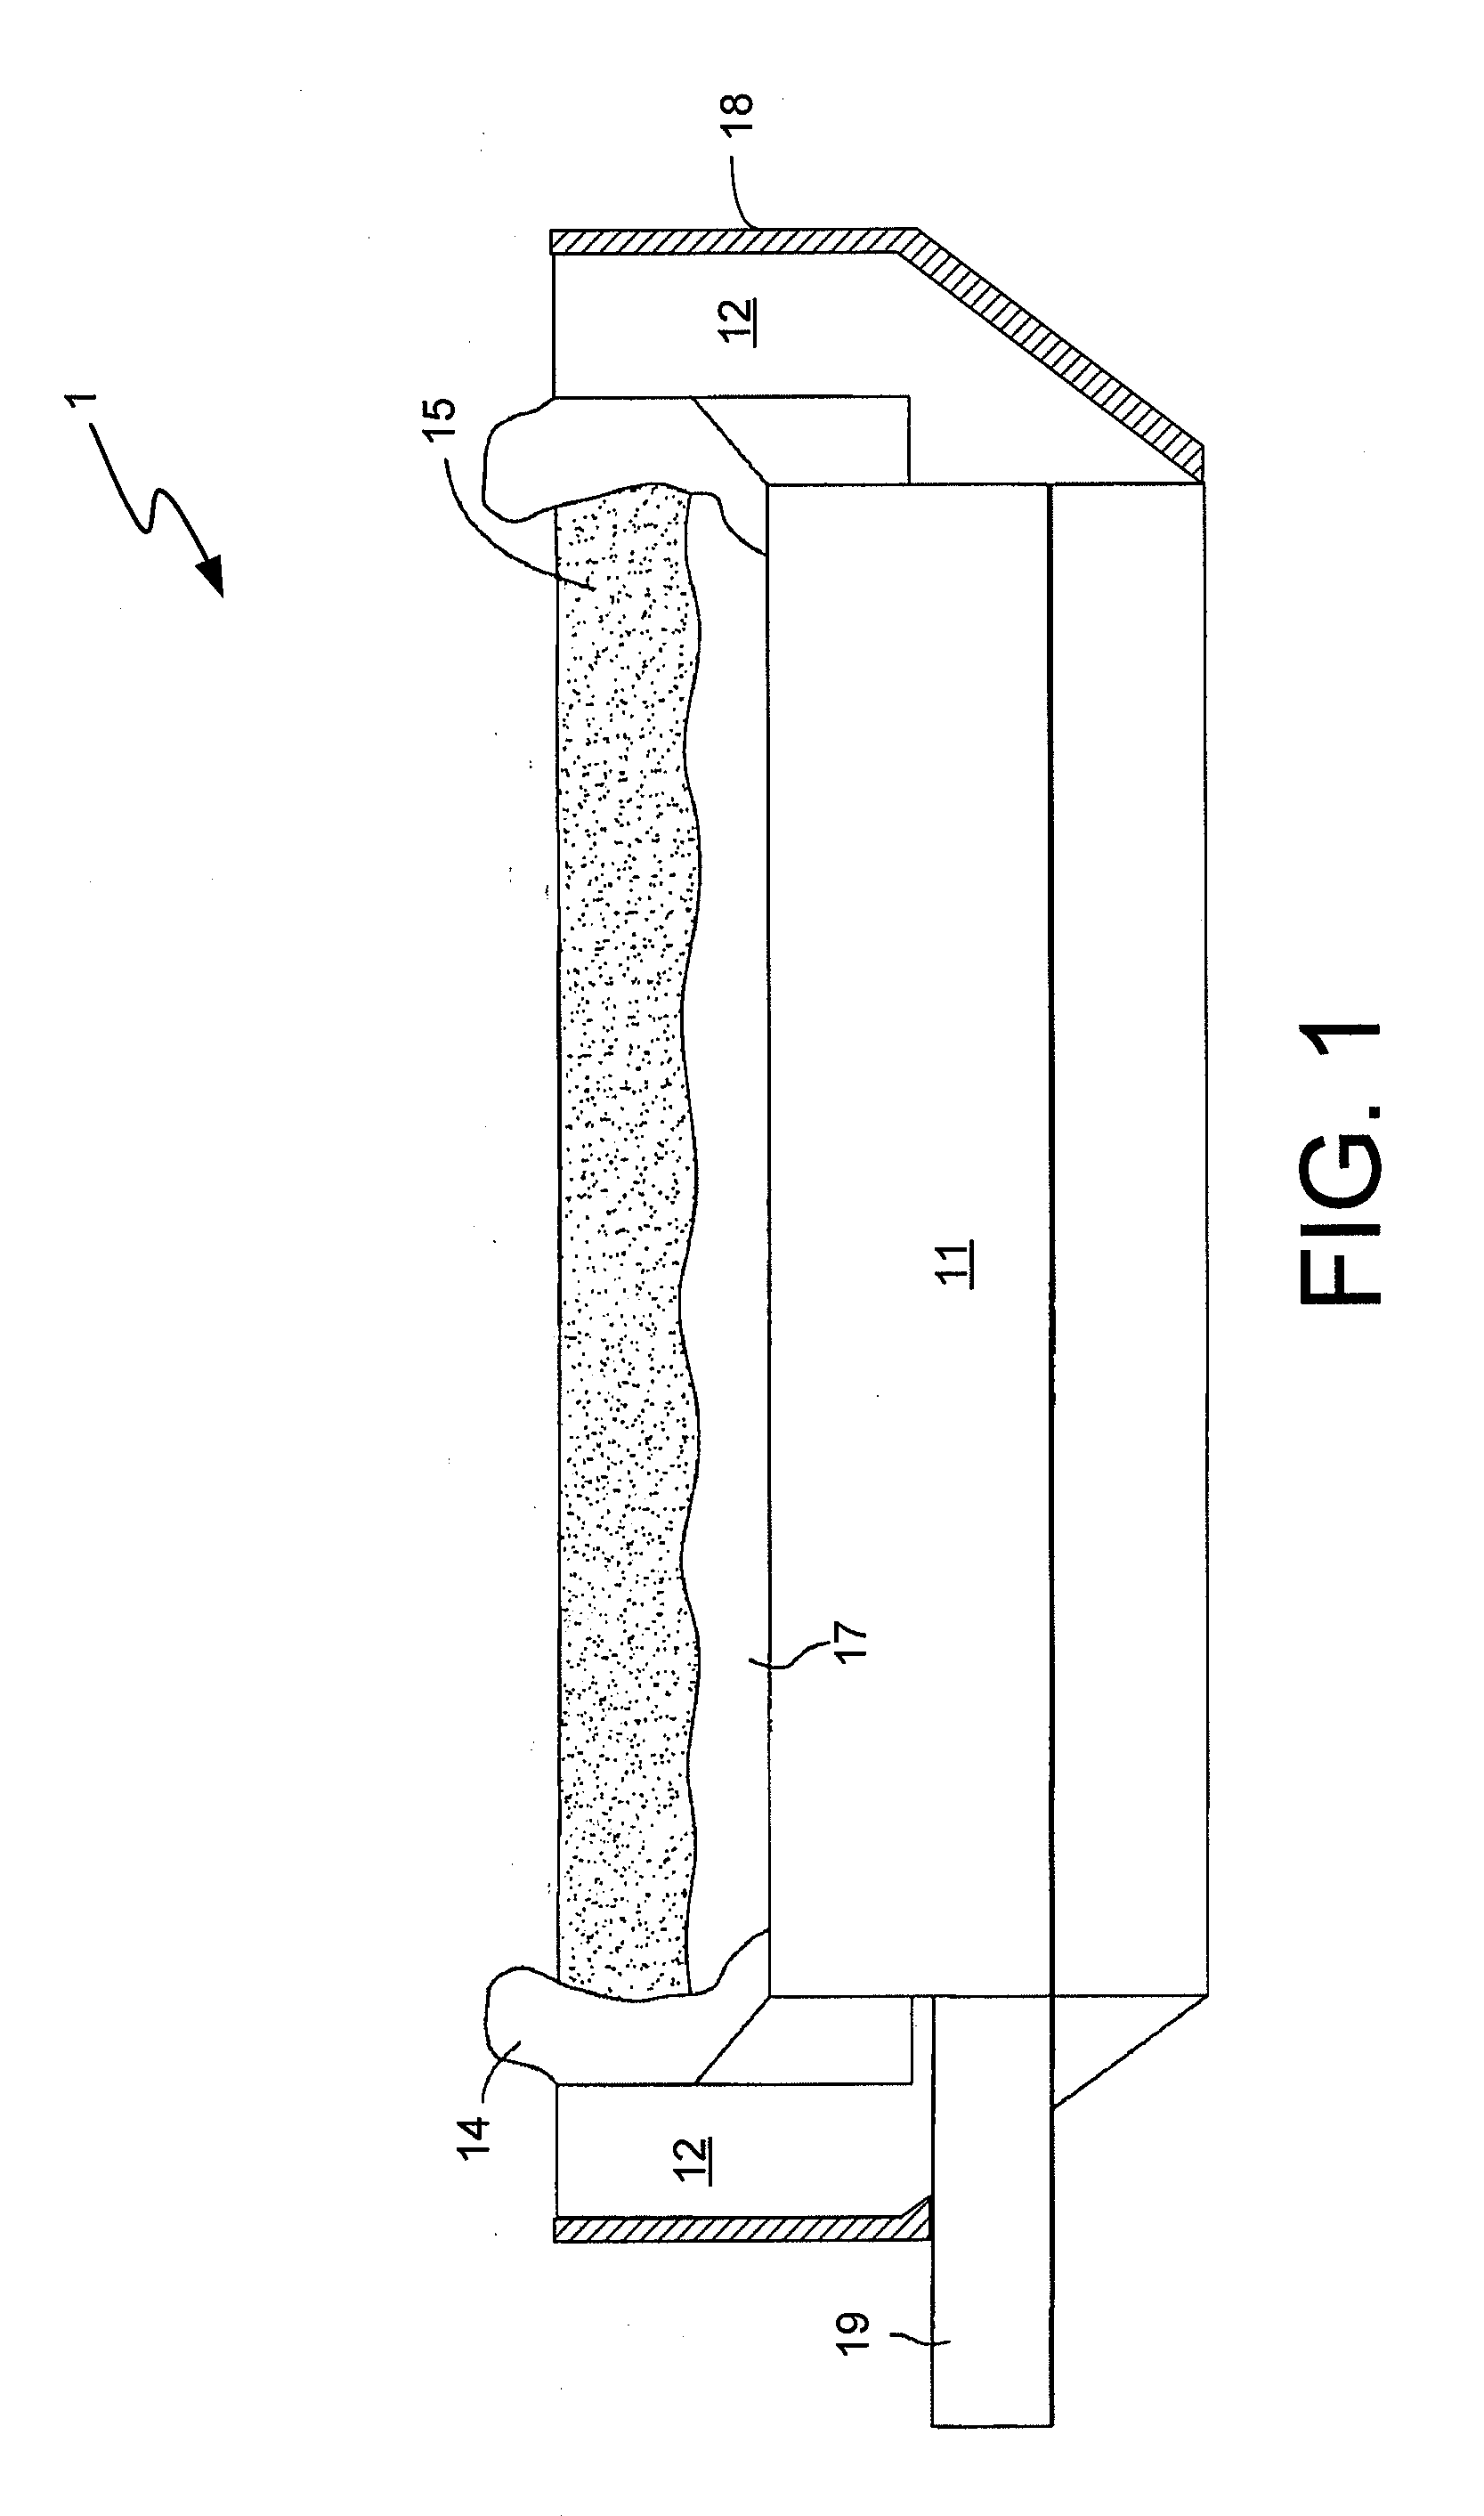 Aluminum electrolysis cell electrolyte containment systems and apparatus and methods relating to the same